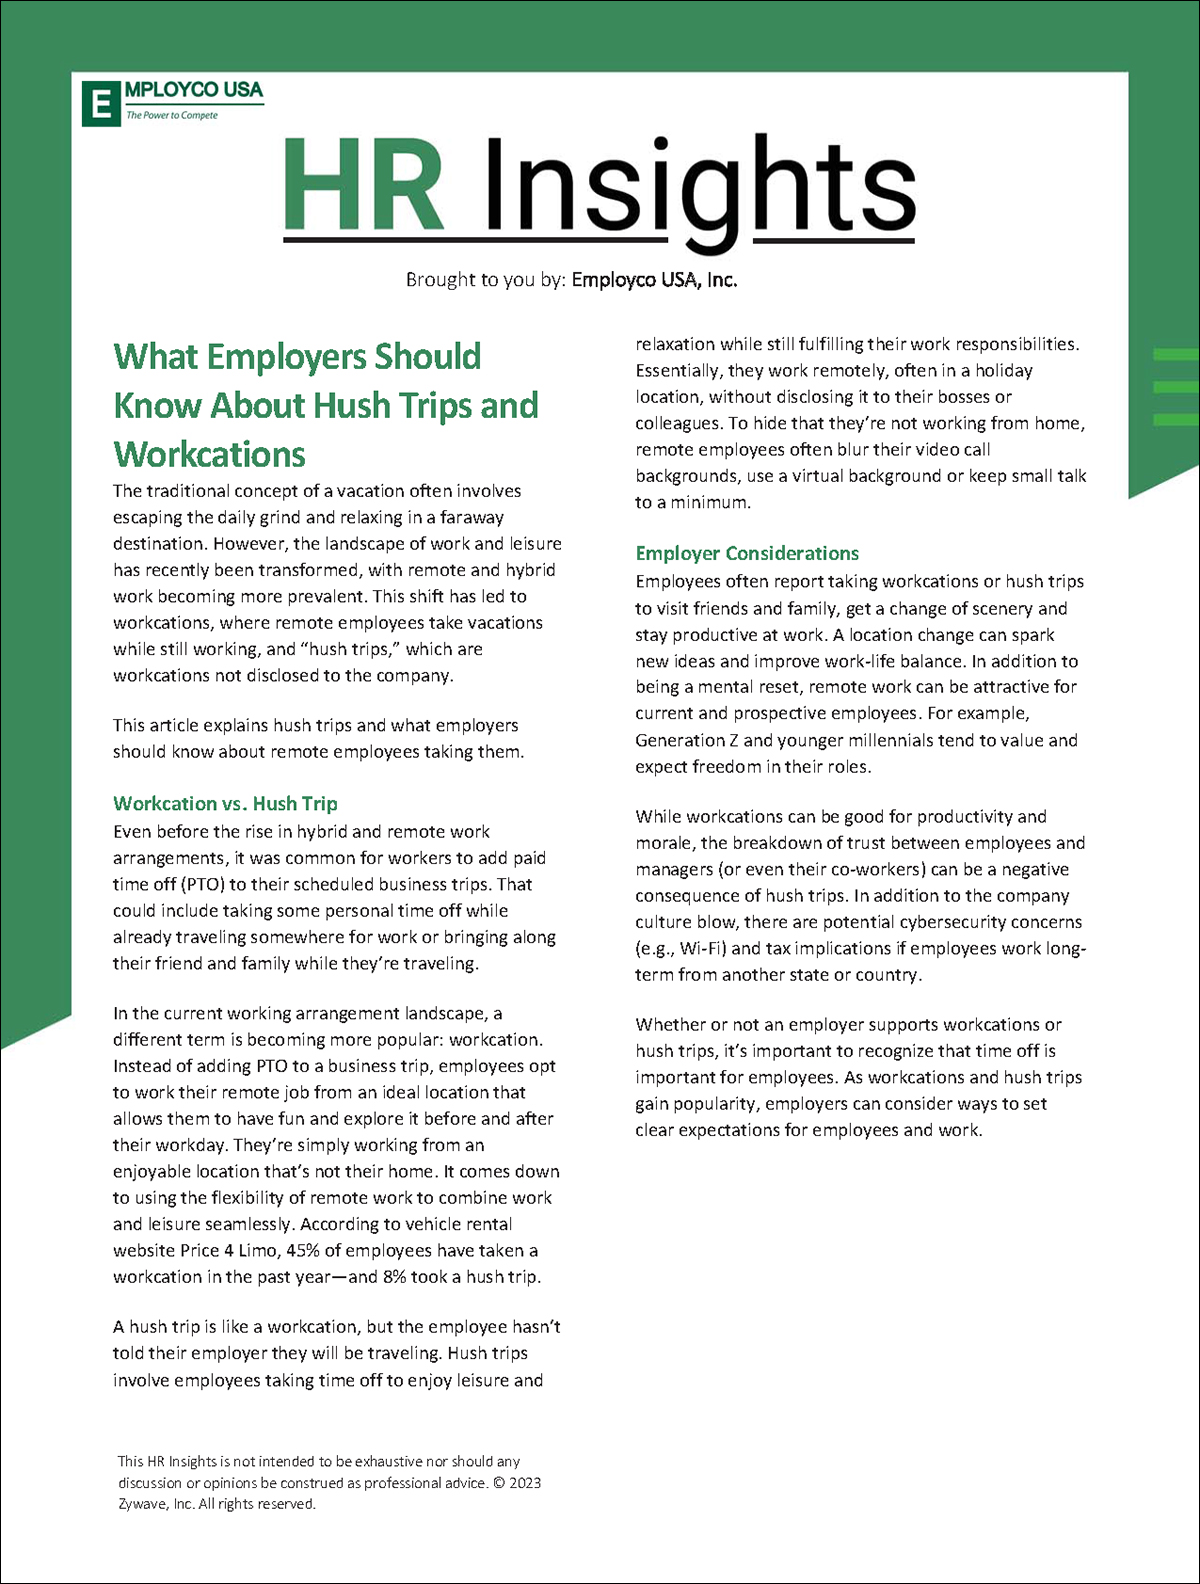 HR Insights: What Employers Should Know About Hush Trips and Workcations